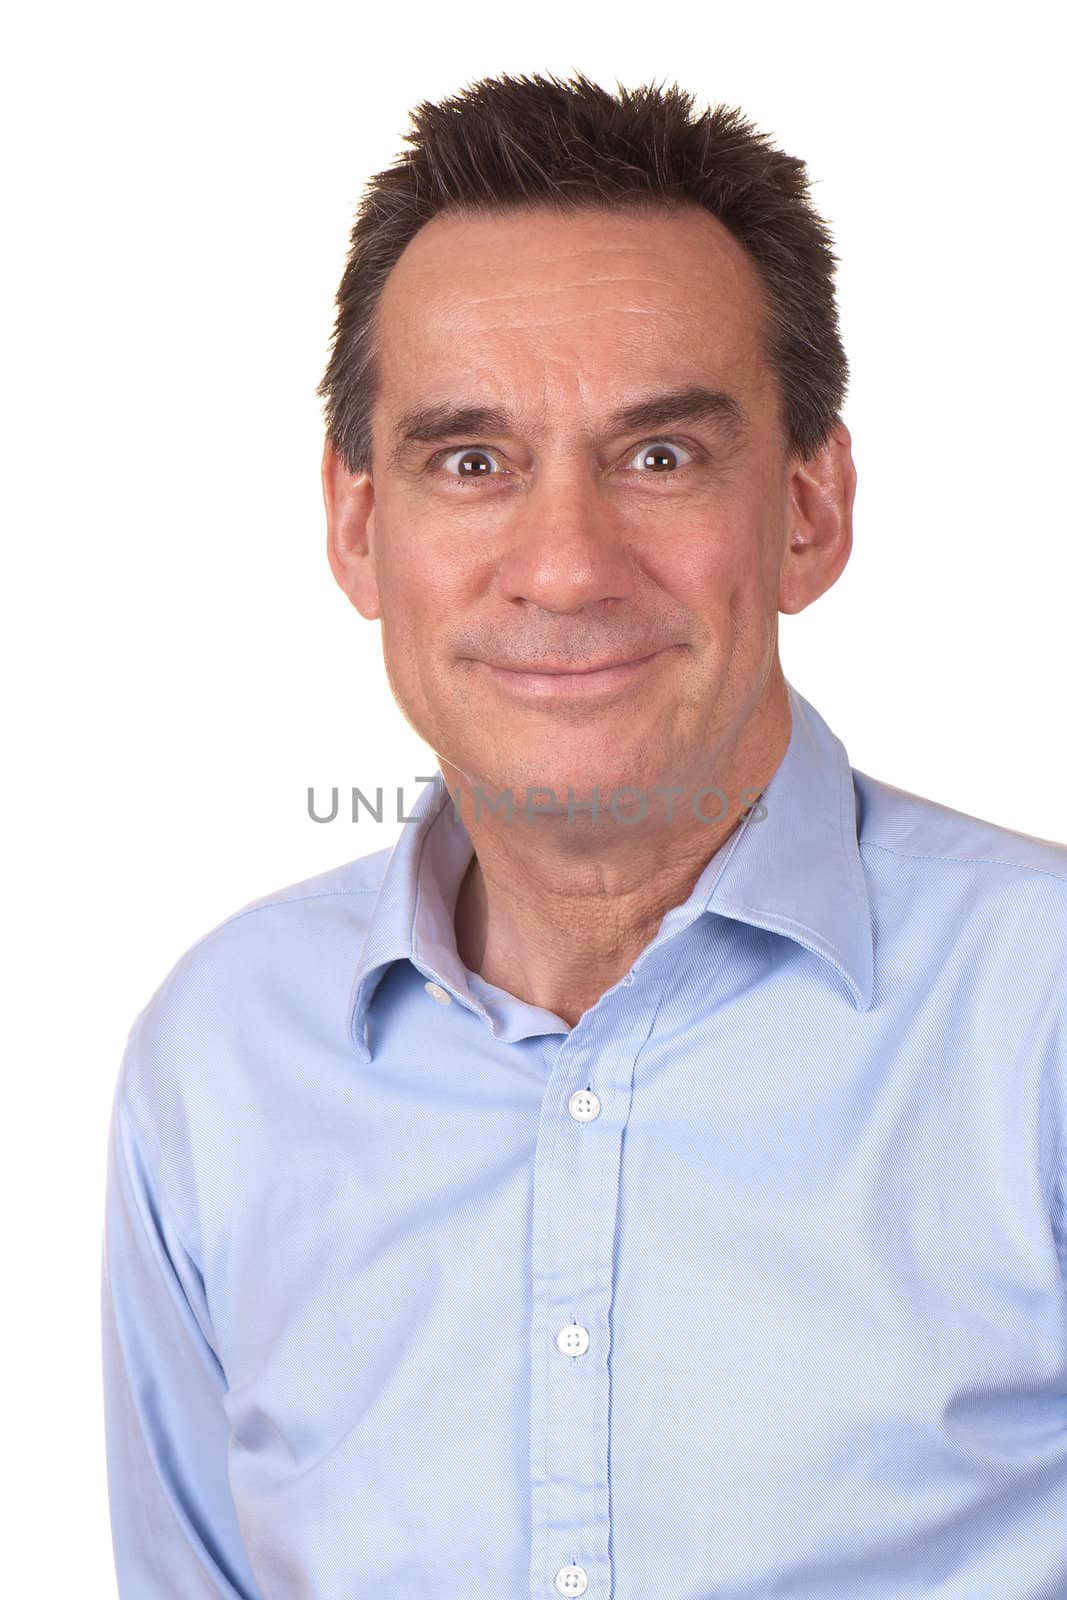 Attractive Middle Age Man in Blue Shirt with Silly Smile and Funny Expression Isolated